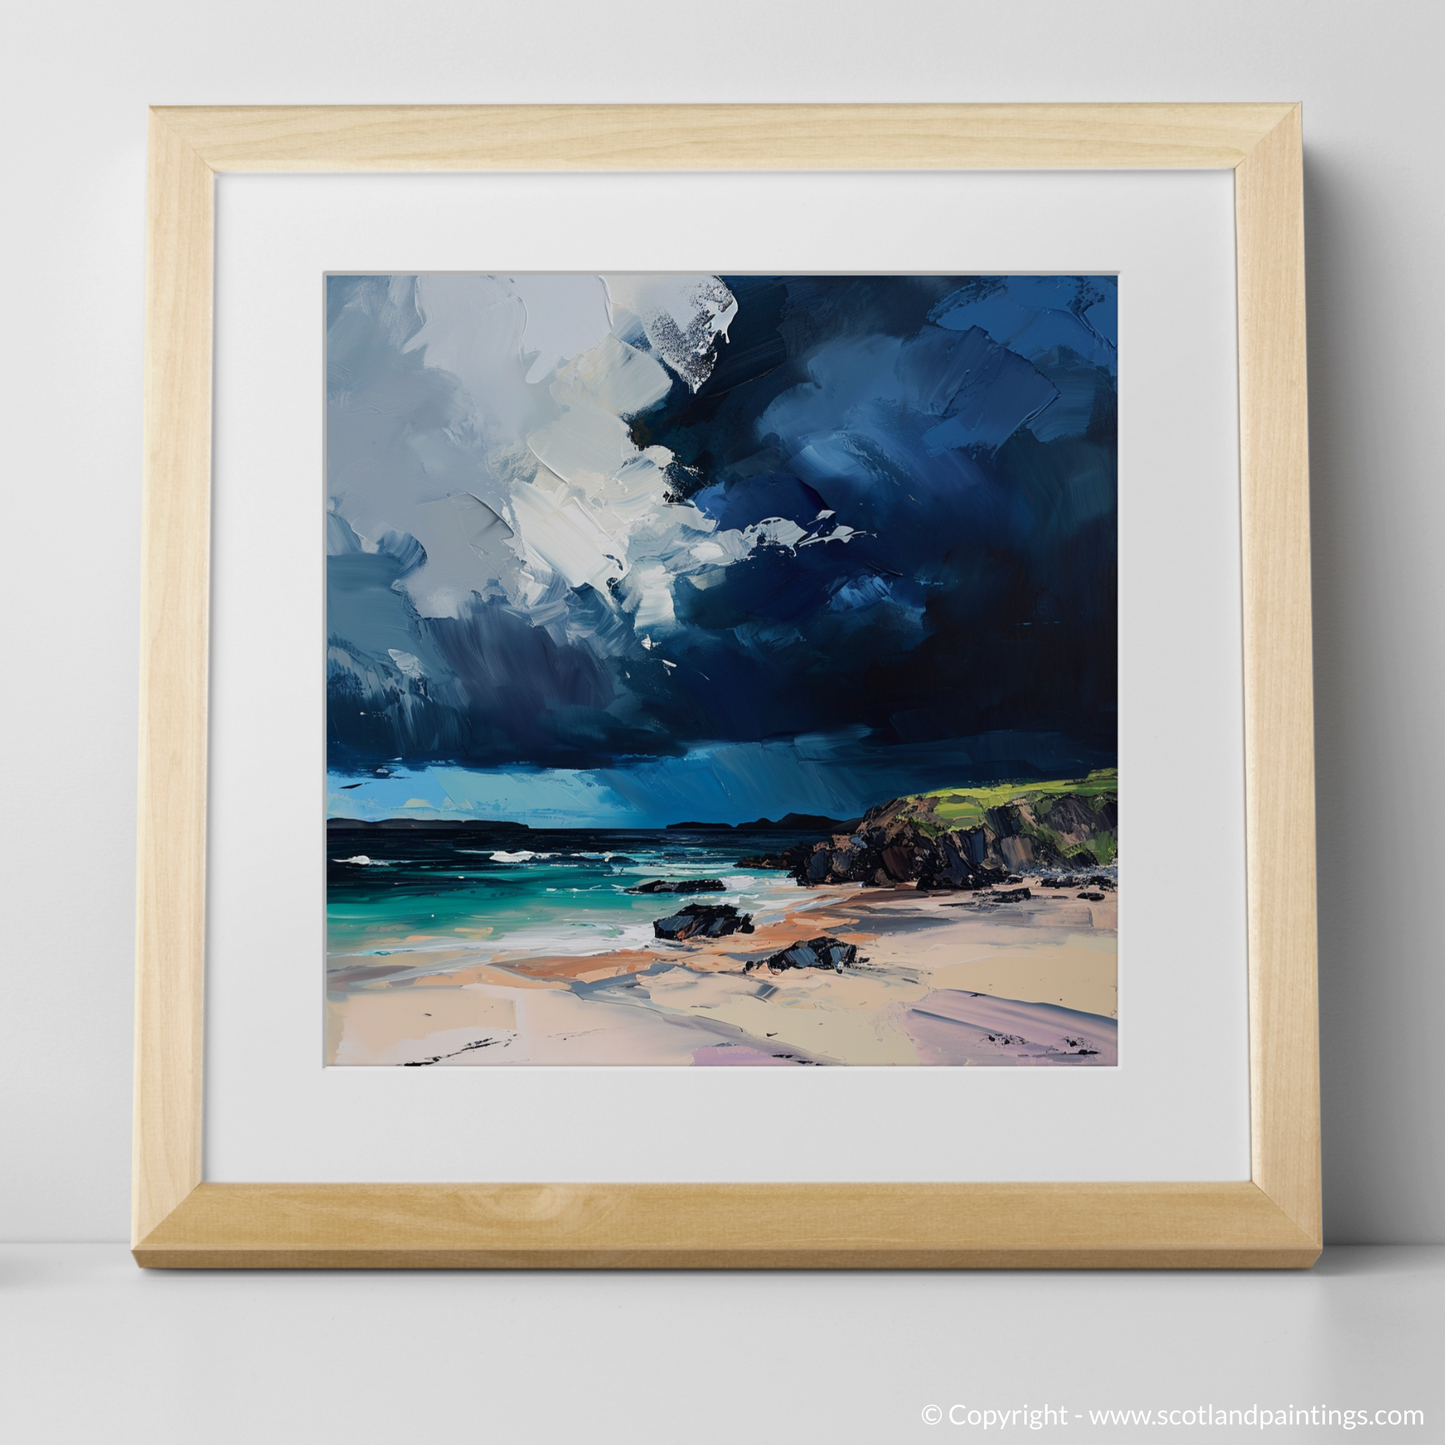 Art Print of Balnakeil Bay with a stormy sky with a natural frame